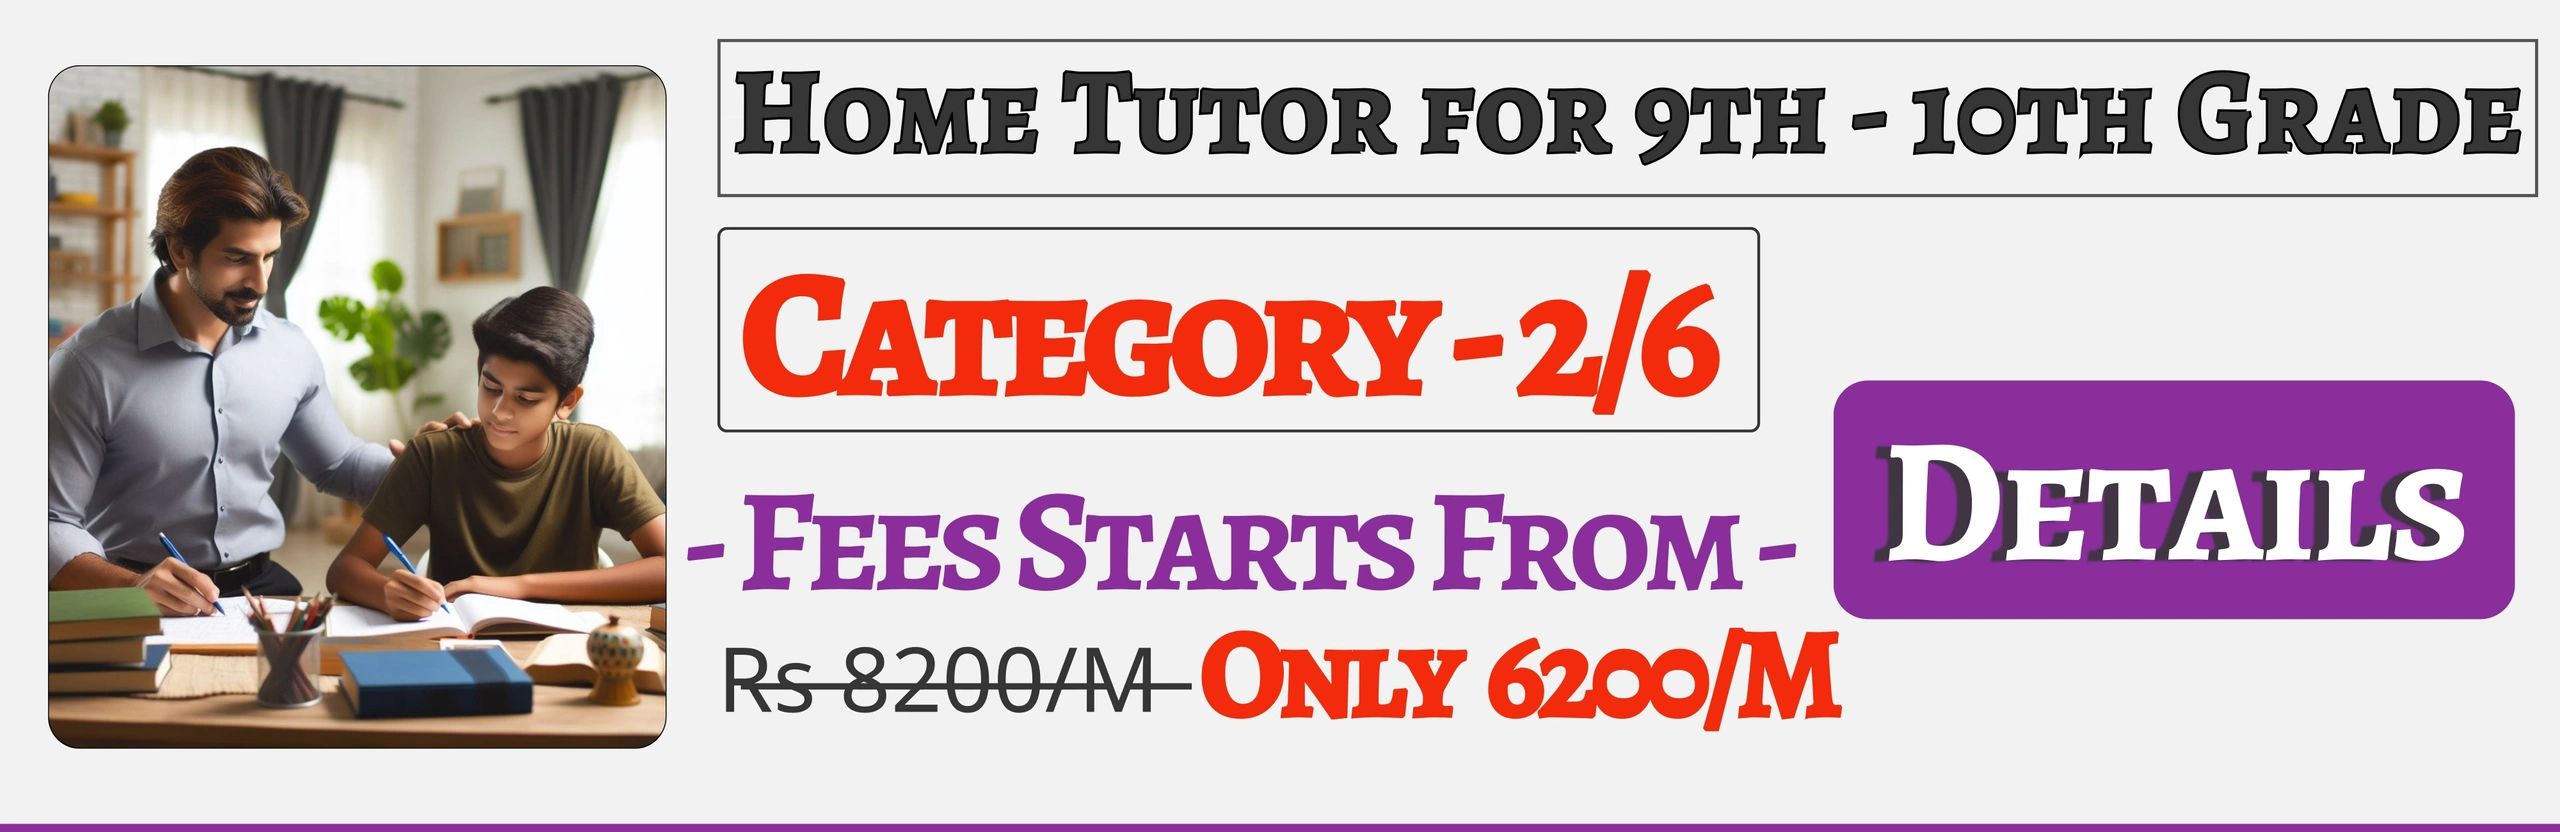 Book Best Home Tuition Tutors For 9th & 10th In Jaipur , Fees Only 6200/M